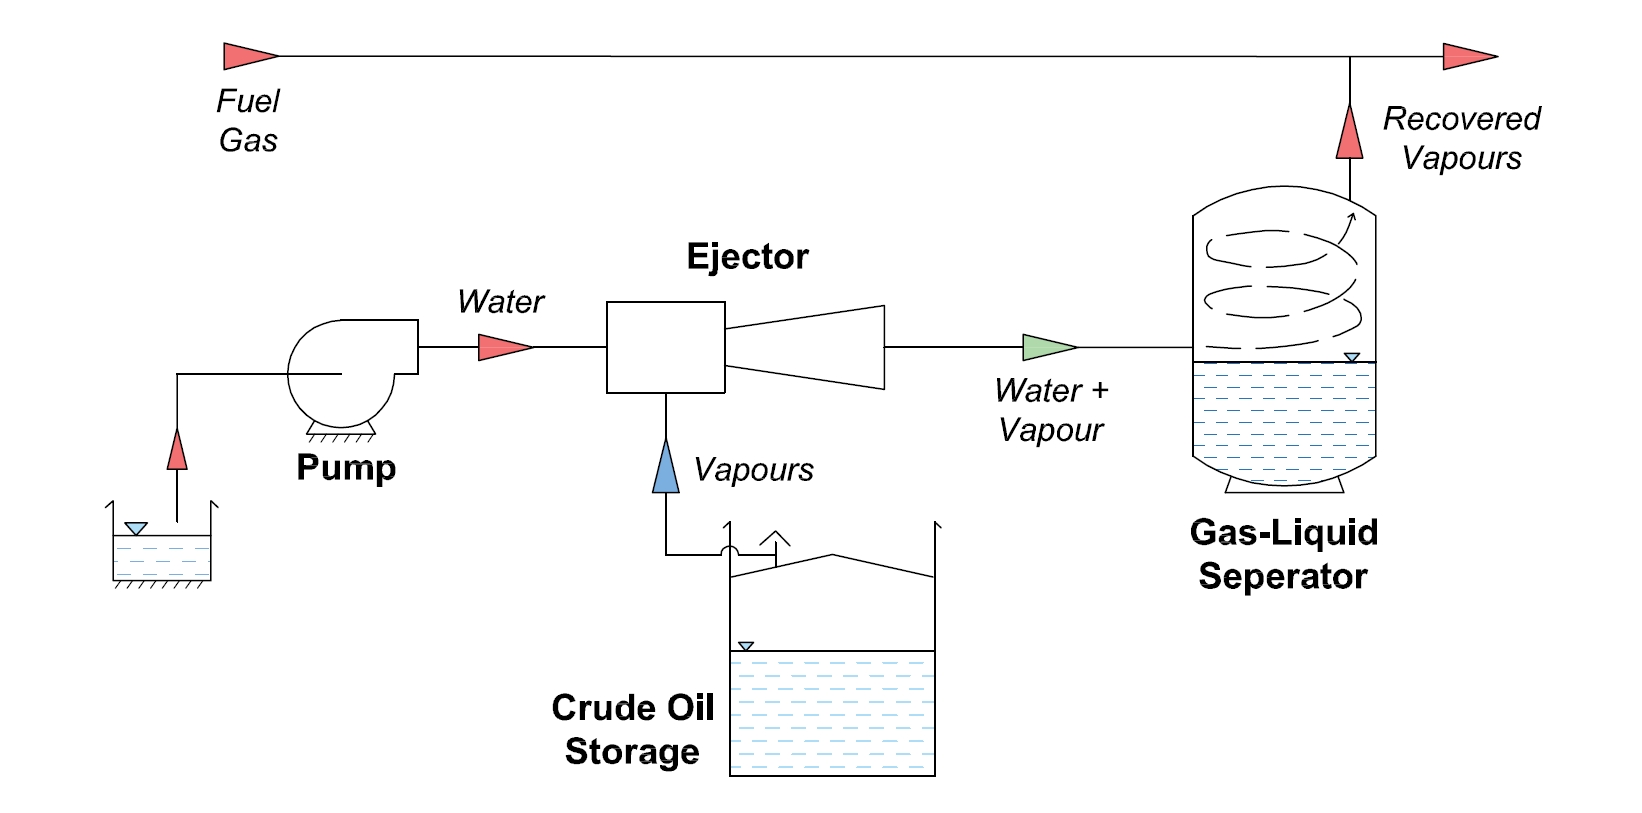 Liquid jet gas Compressors for Vapour Recovery from Crude Oil Tanks